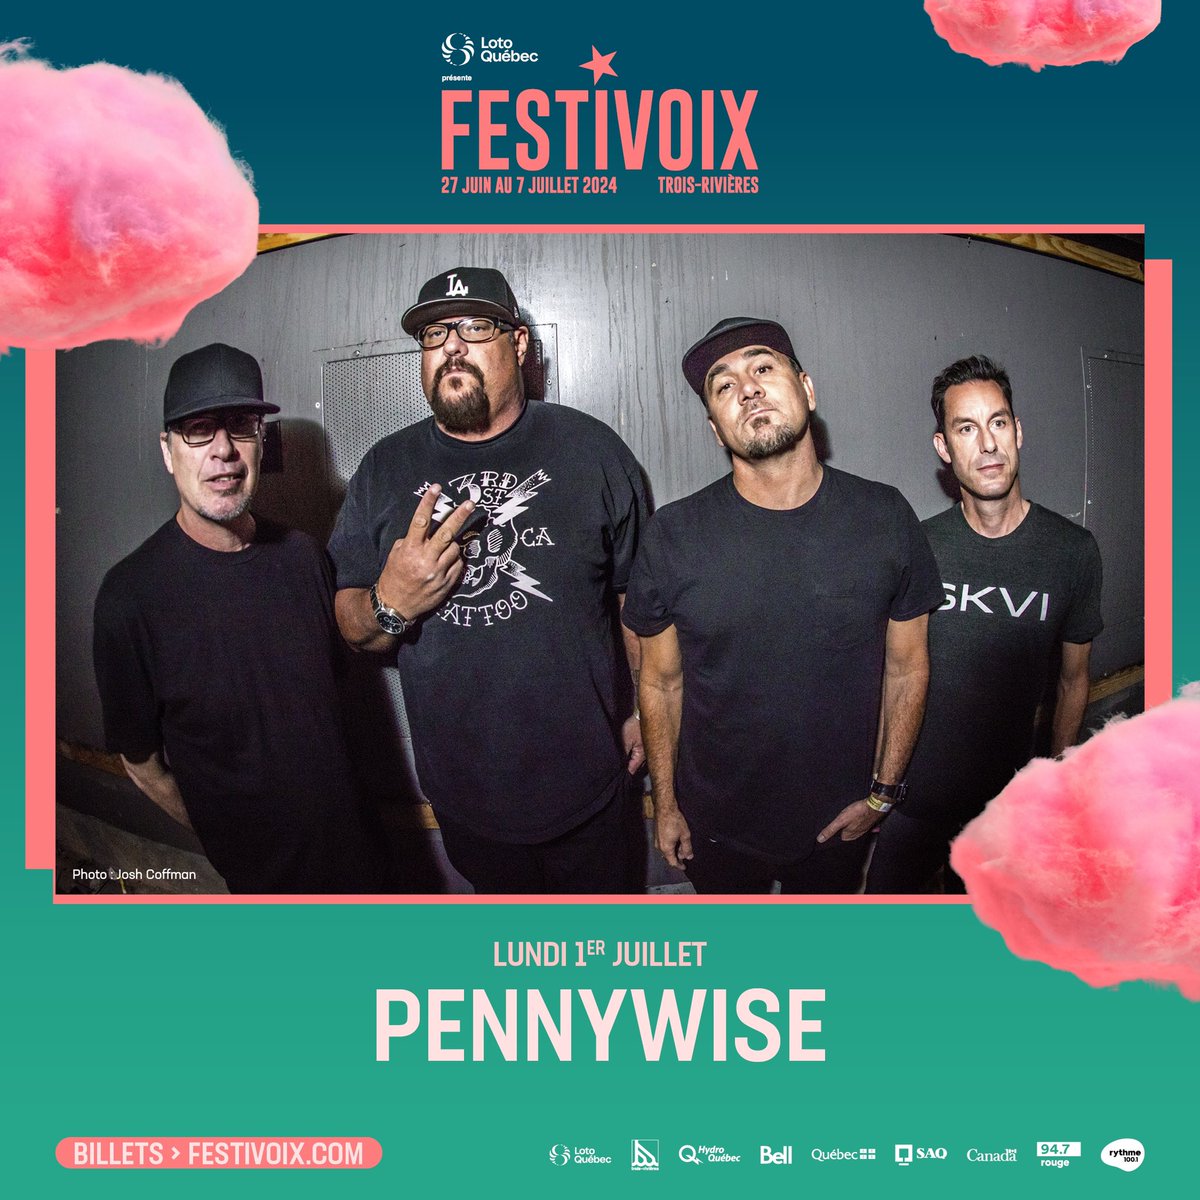 See you at @FestiVoix on July 1st! Tickets and info at festivoix.com